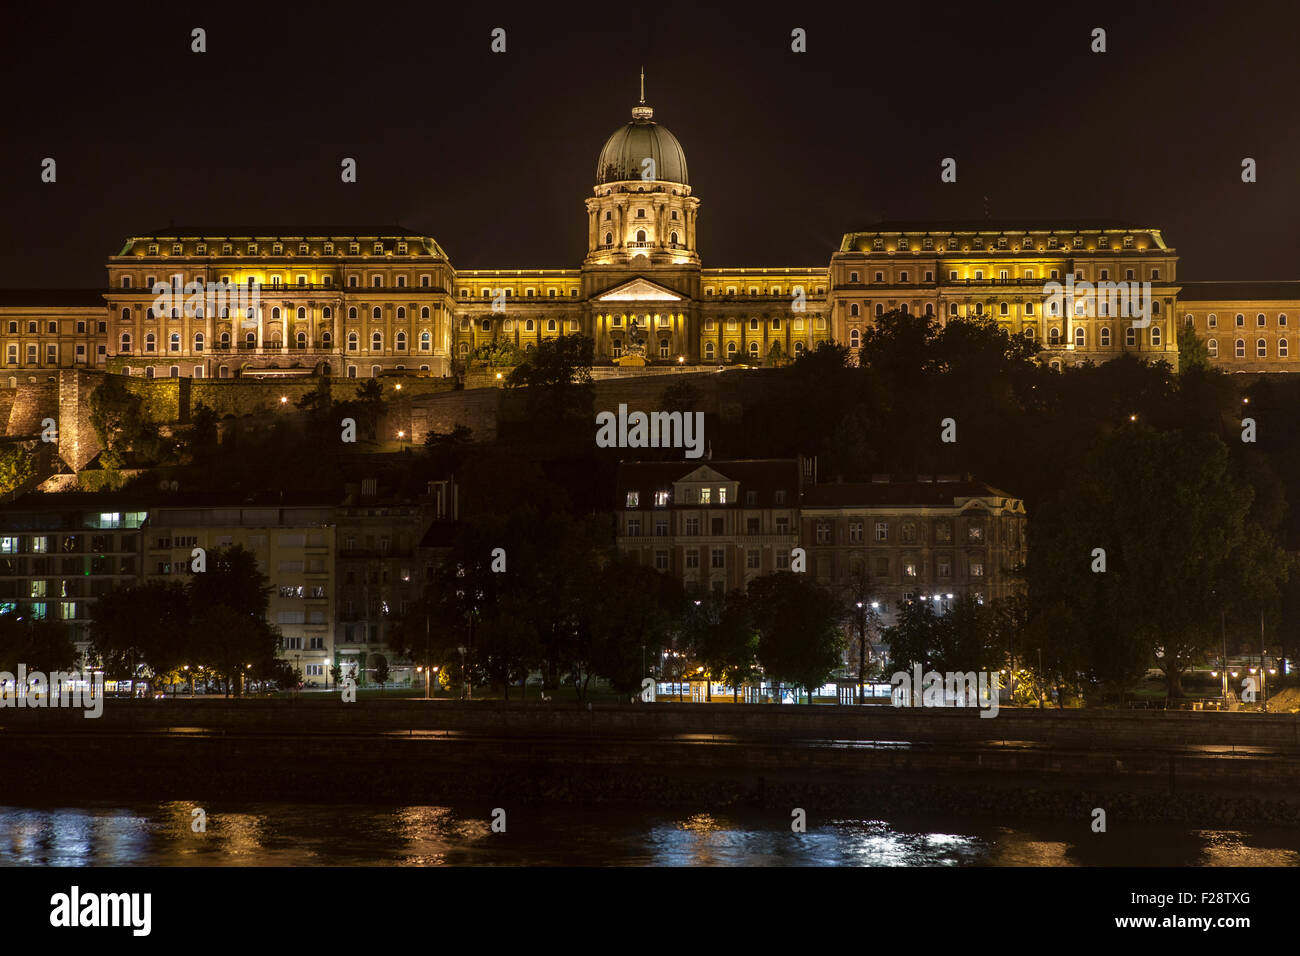 The beautiful Buda Castle and the River Danube at night in Budapest, Hungary. Stock Photo